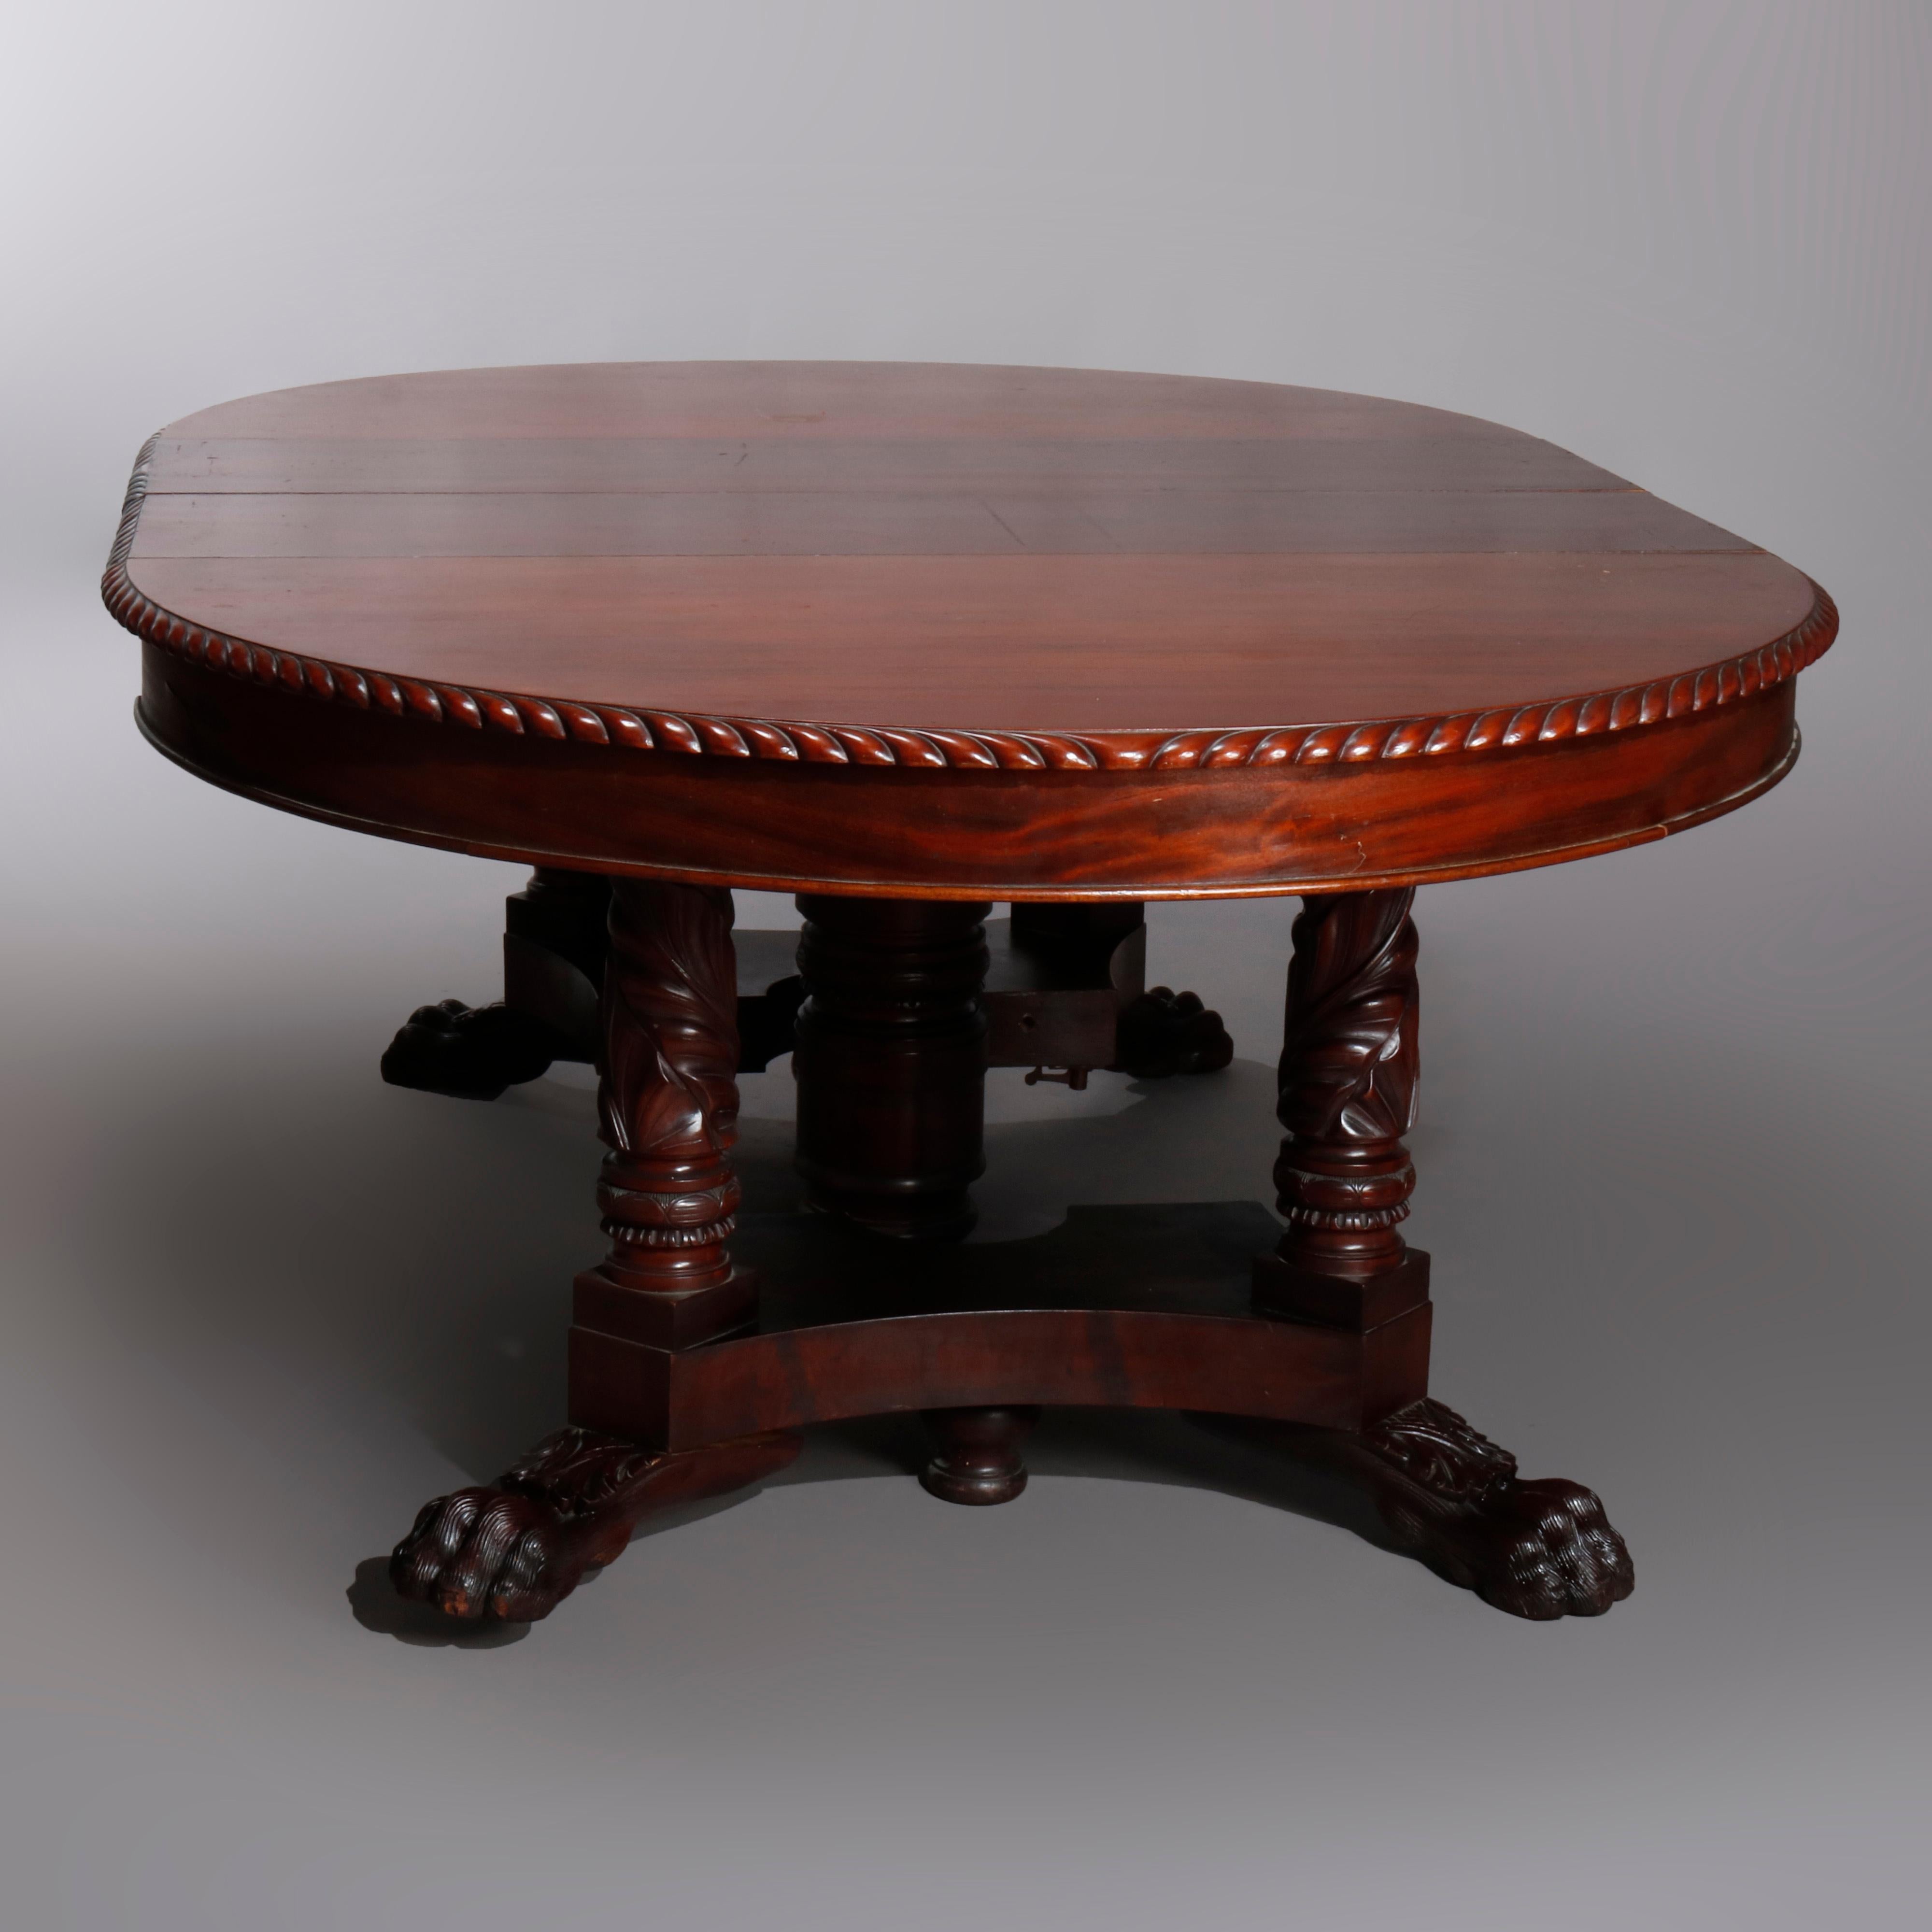 19th Century Antique American Empire Carved Flame Mahogany Banquet Table with 5 Leaves